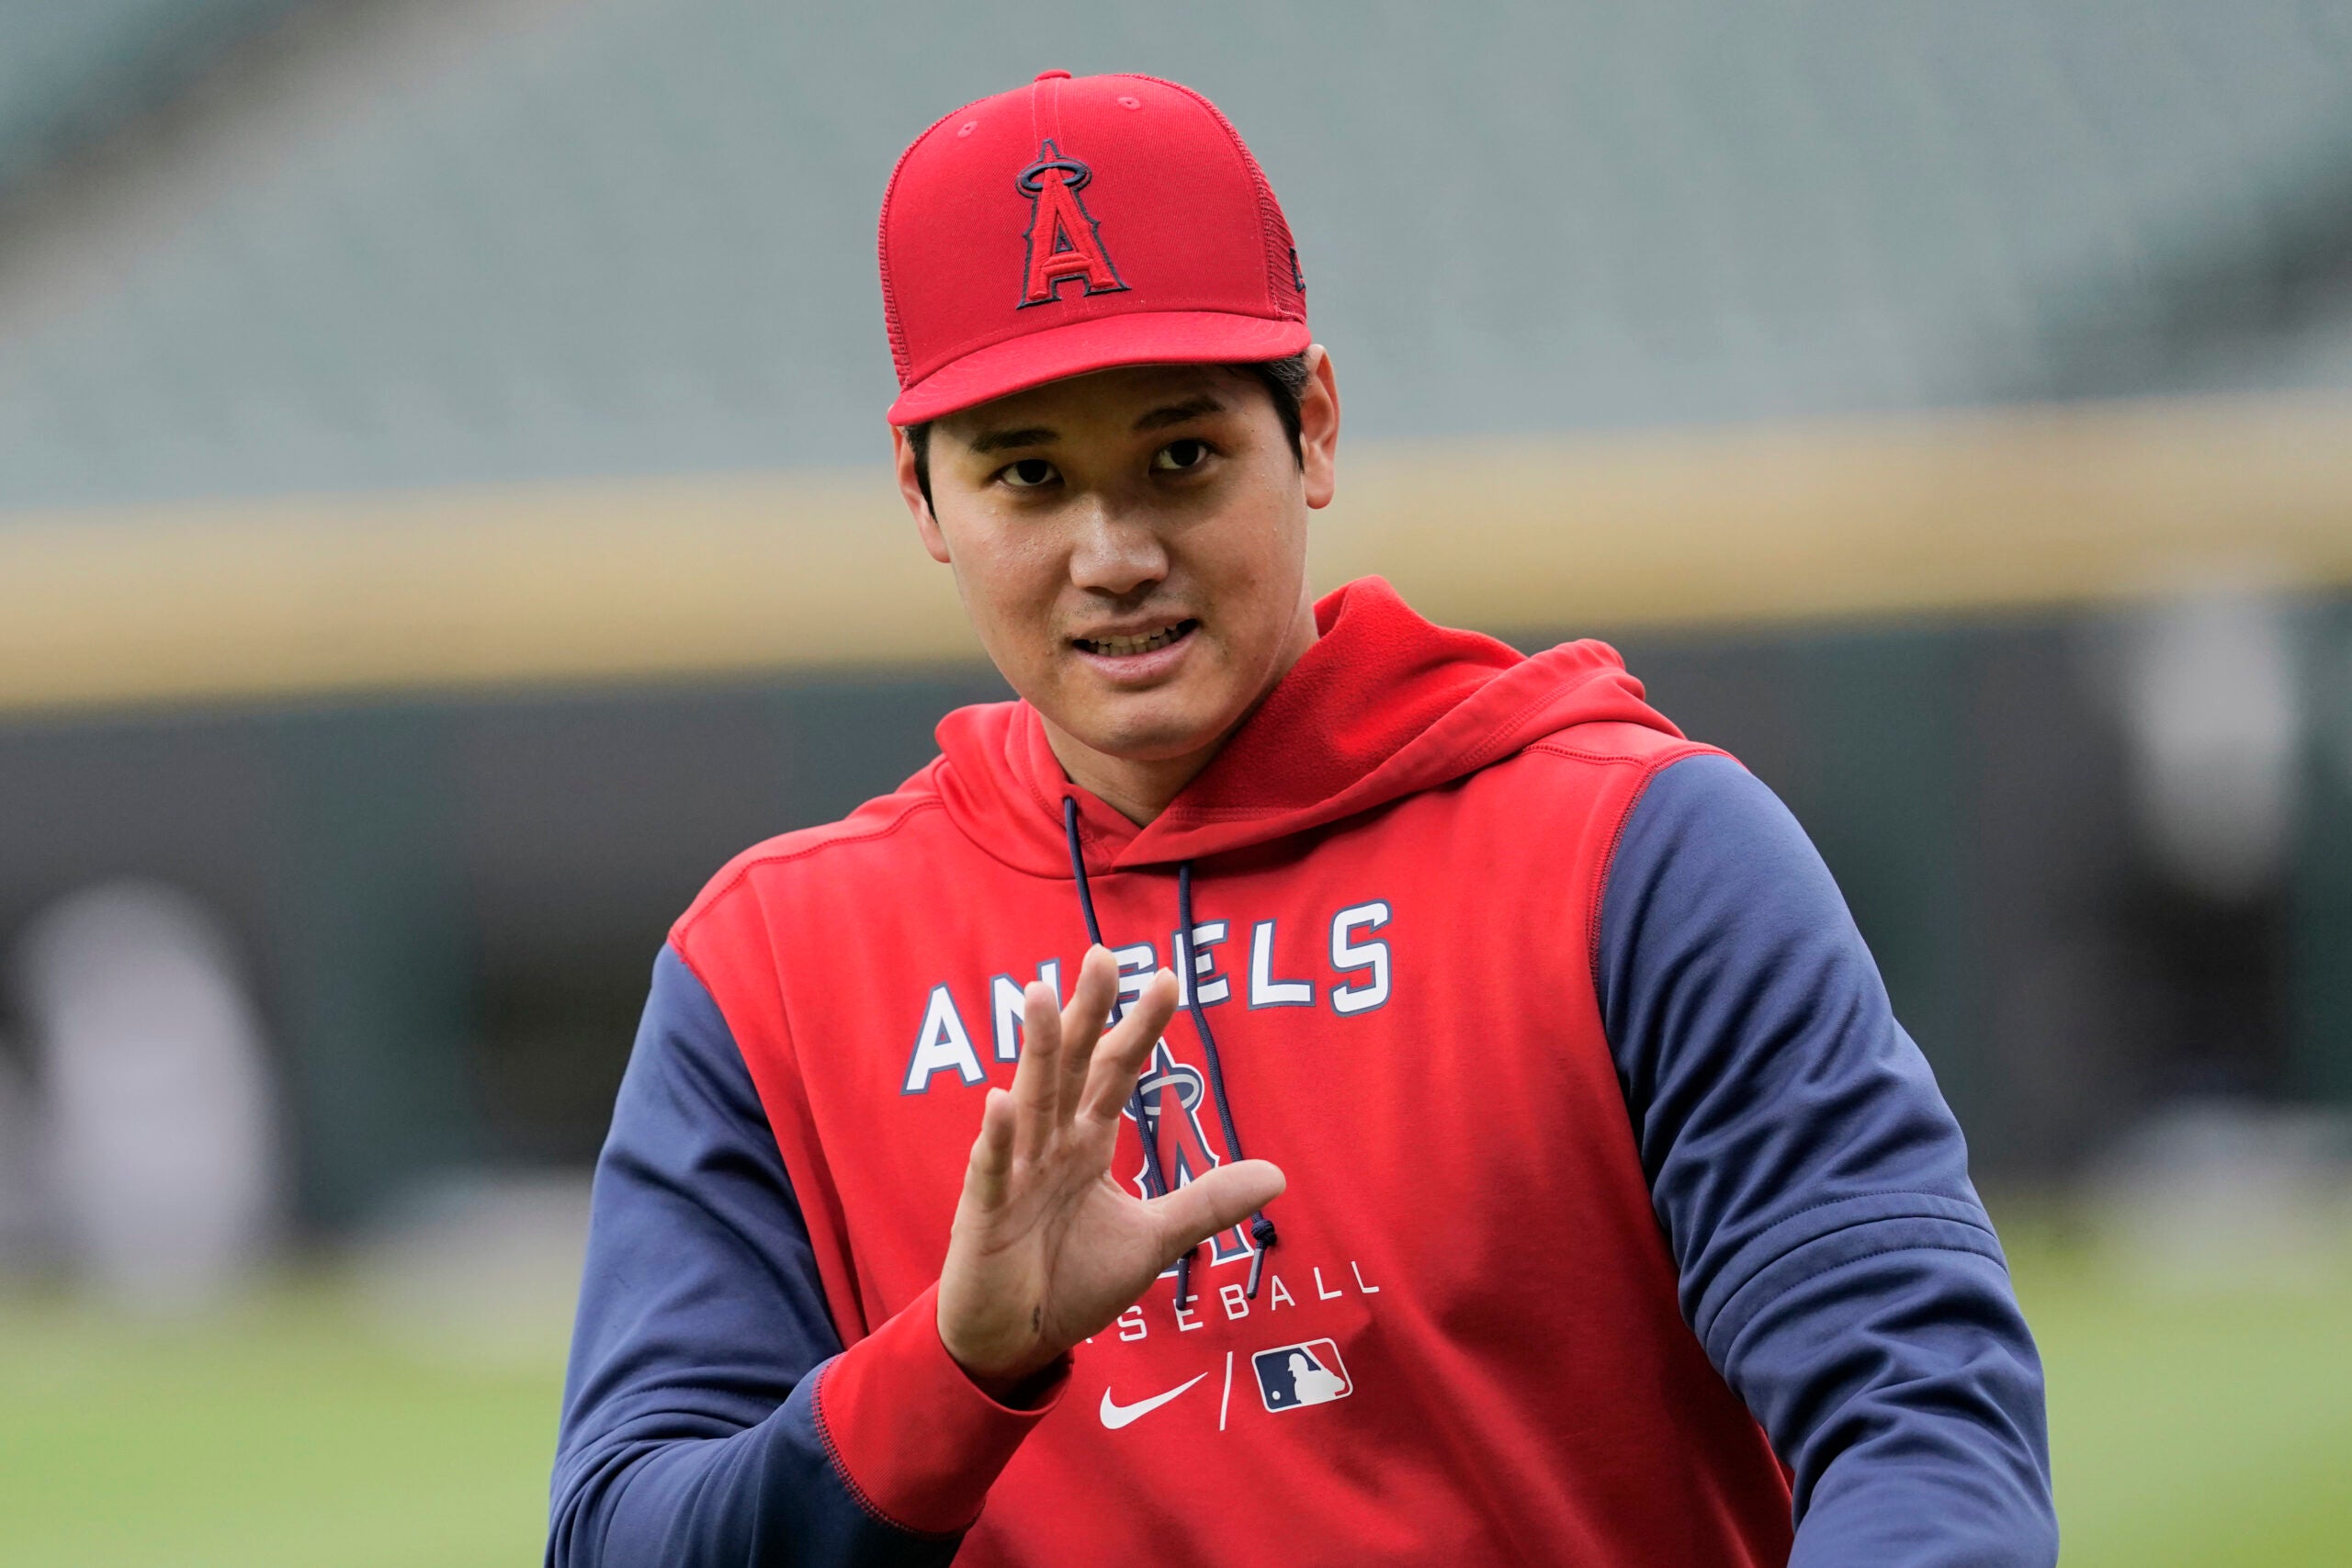 Pedro Martinez believes Shohei Ohtani is going to sign with Red